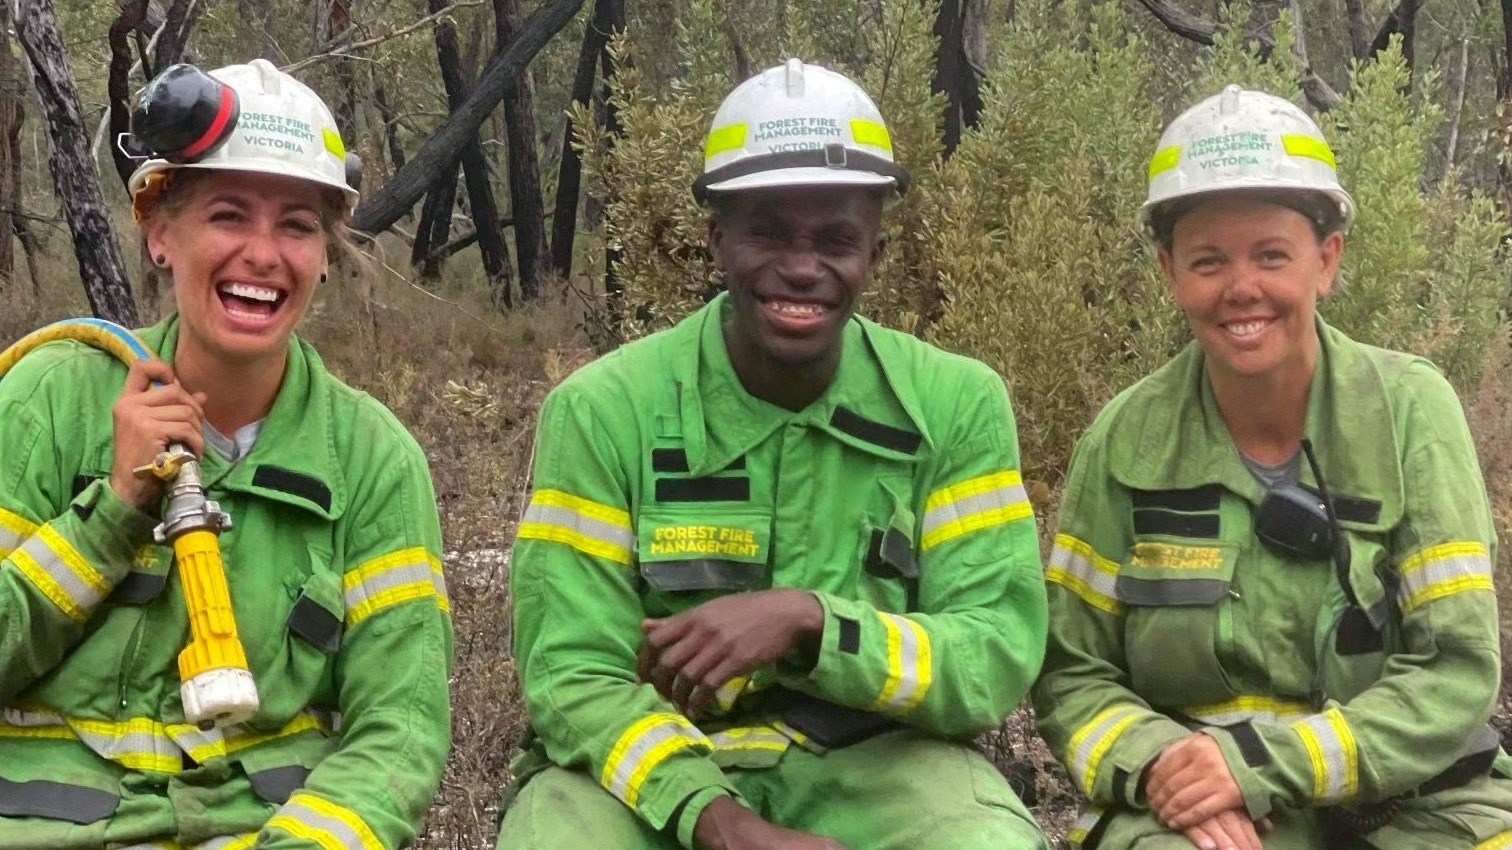 Three people in green firefighting uniforms sit in a row smiling. 